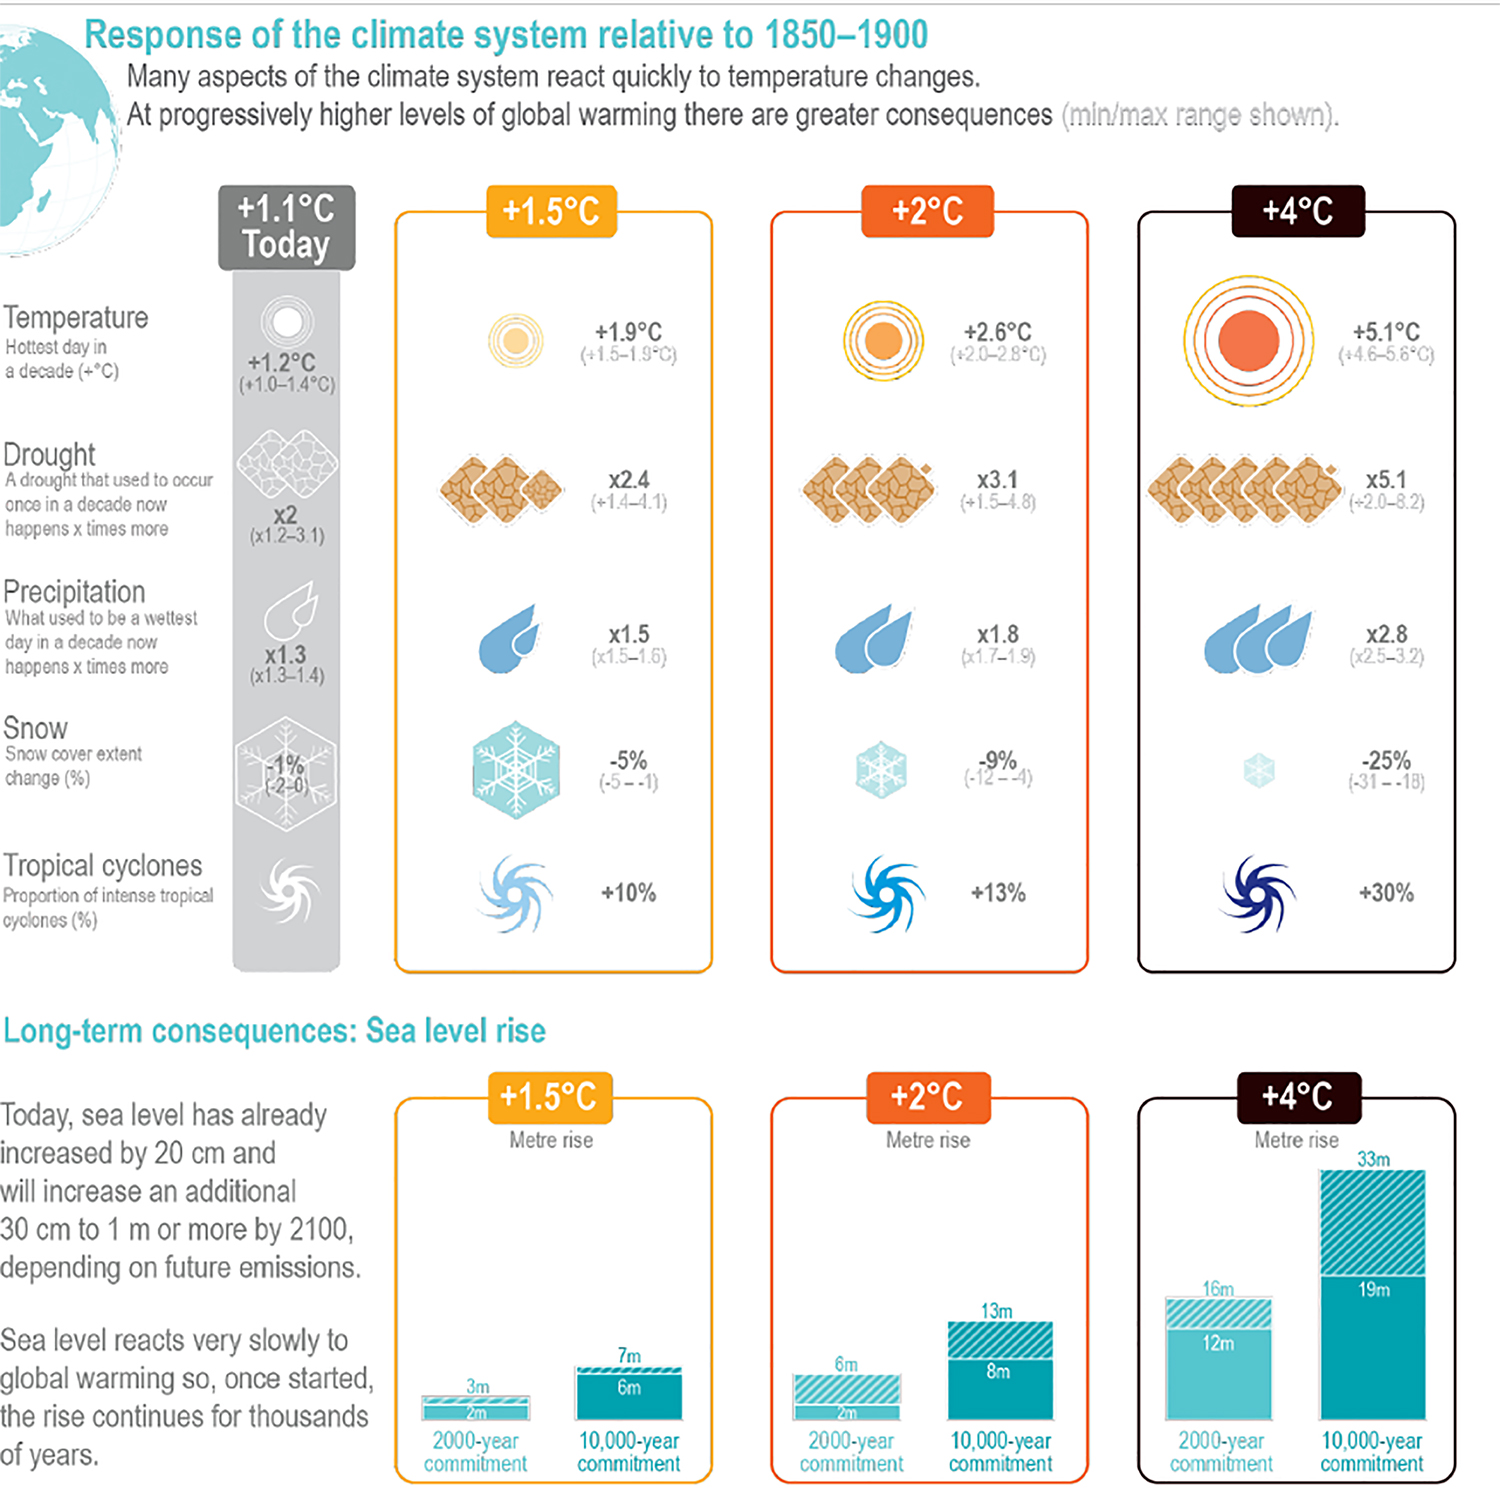 Graphic from the latest IPCC report depicting responses of the climate system at different warming scenarios.